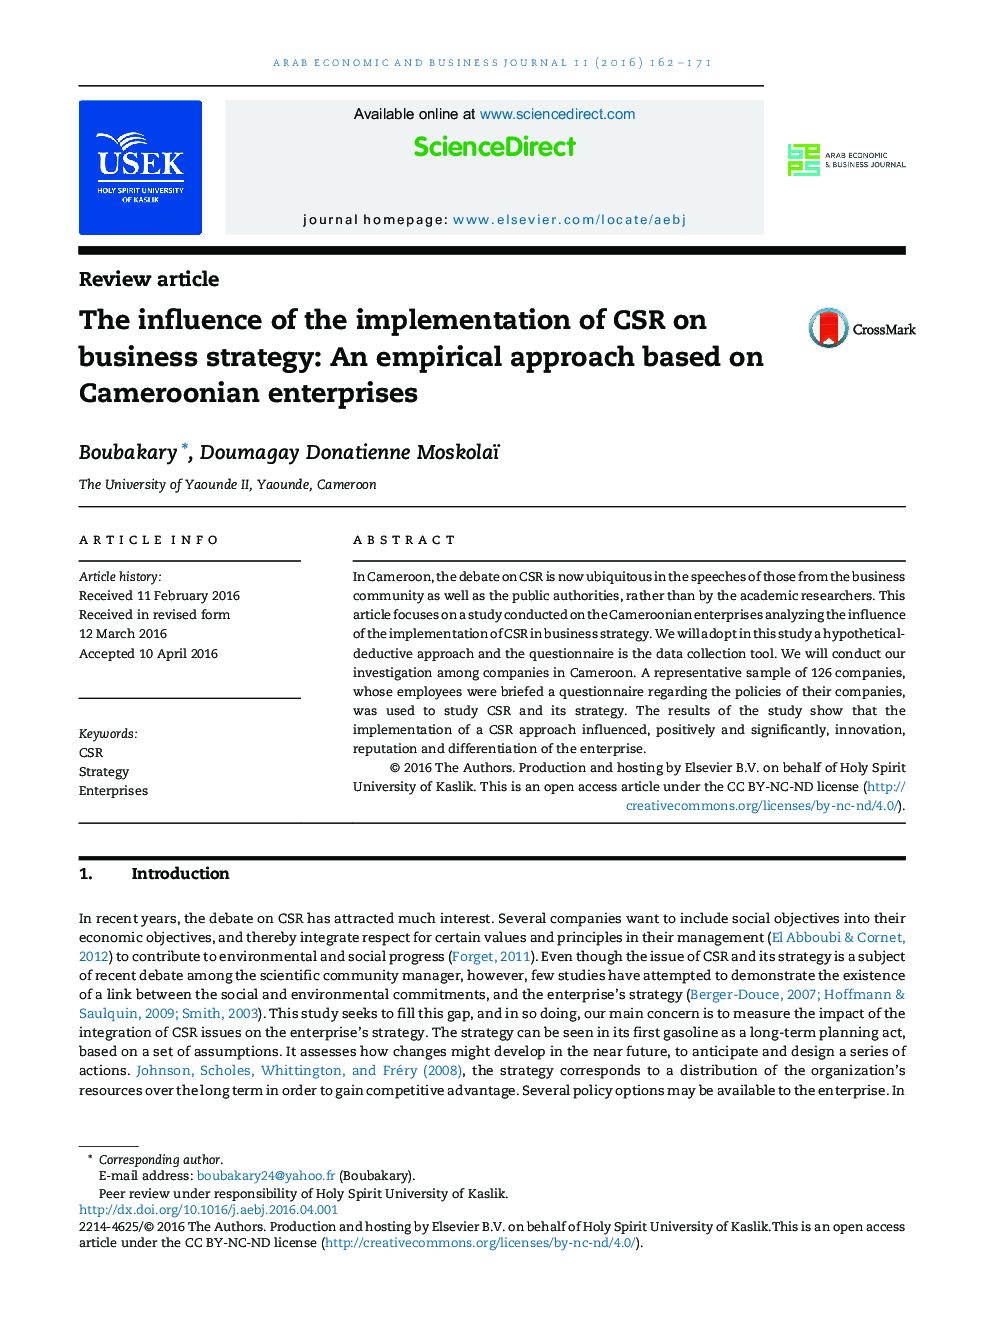 The influence of the implementation of CSR on business strategy: An empirical approach based on Cameroonian enterprises